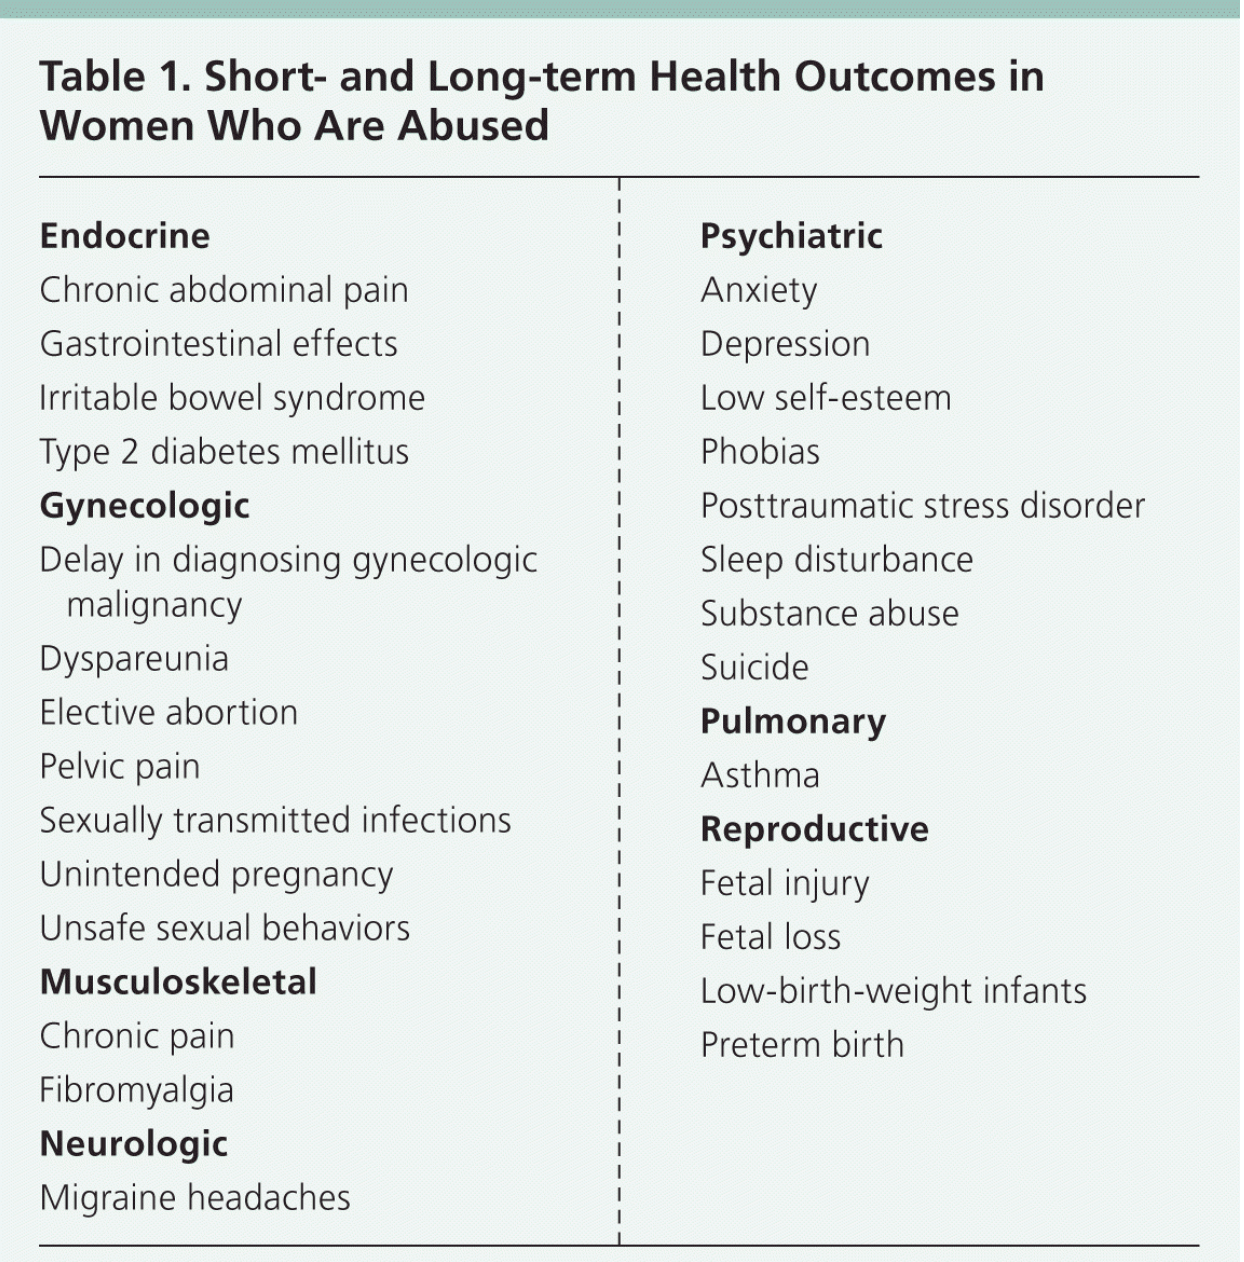 Table 1. Short- and Long-term Health Outcomes in Women Who Are Abused8